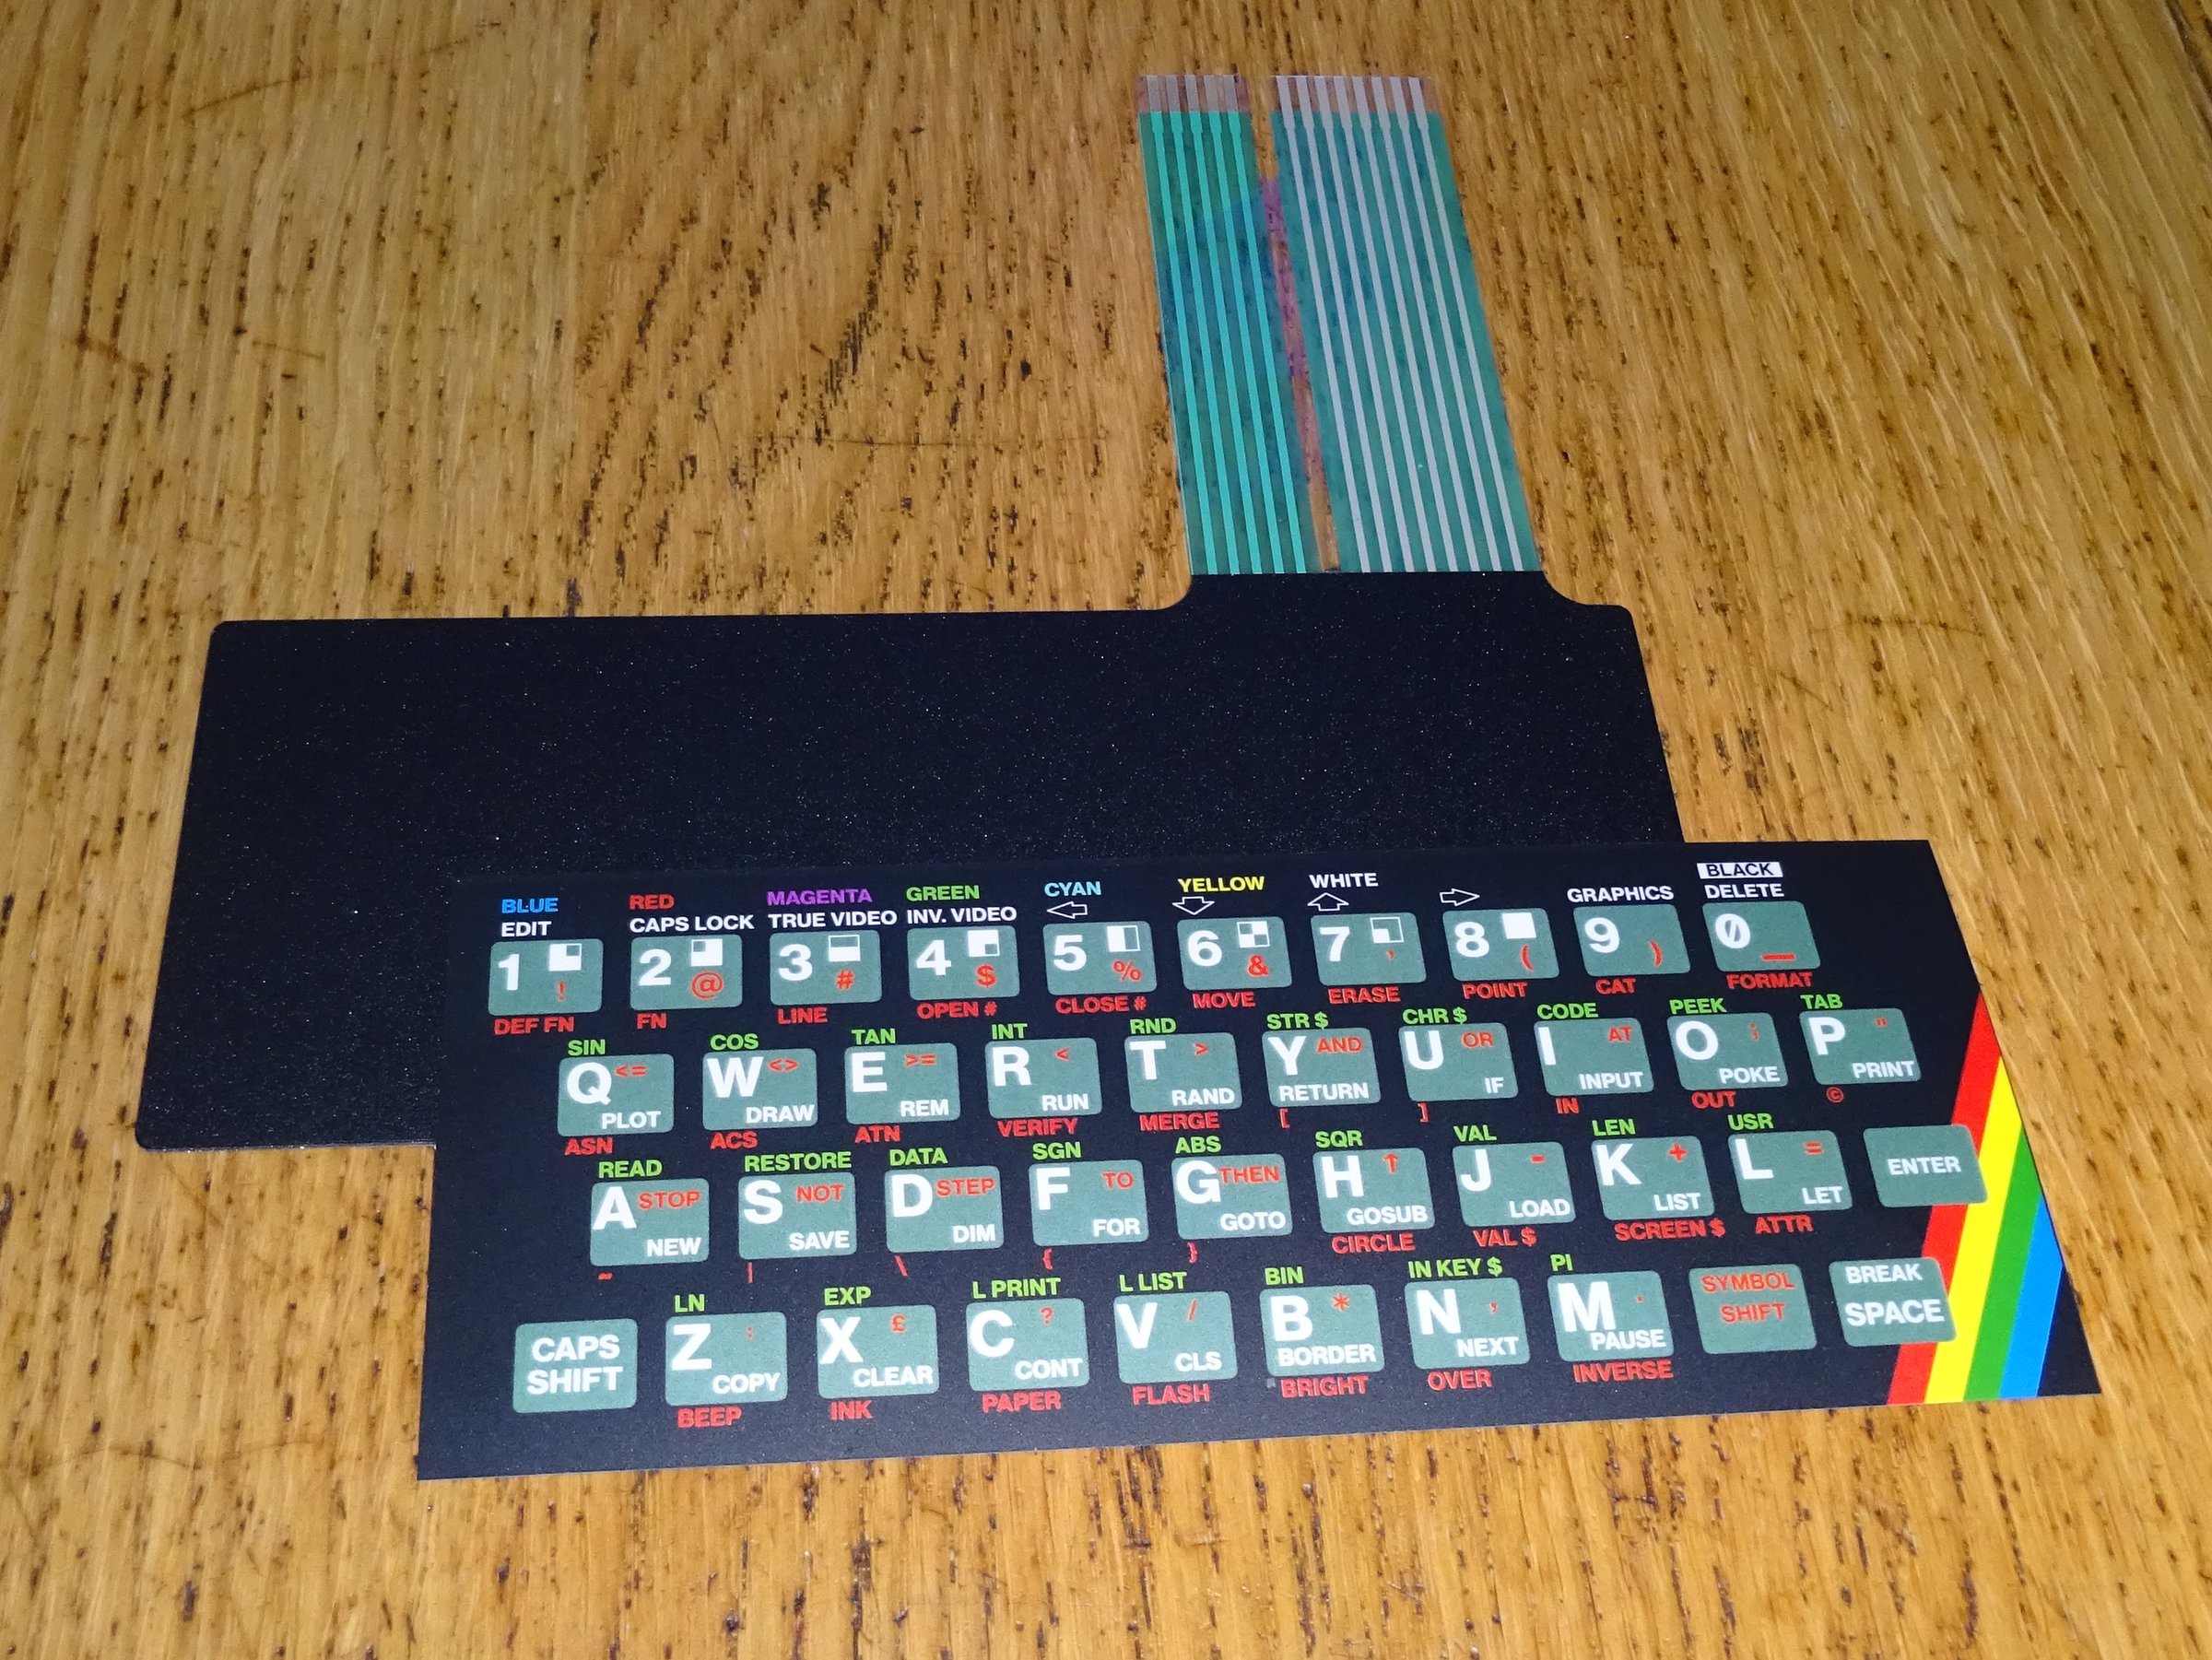 Keyboard Overlays for ZX Max 48 from tynemouthsw on Tindie